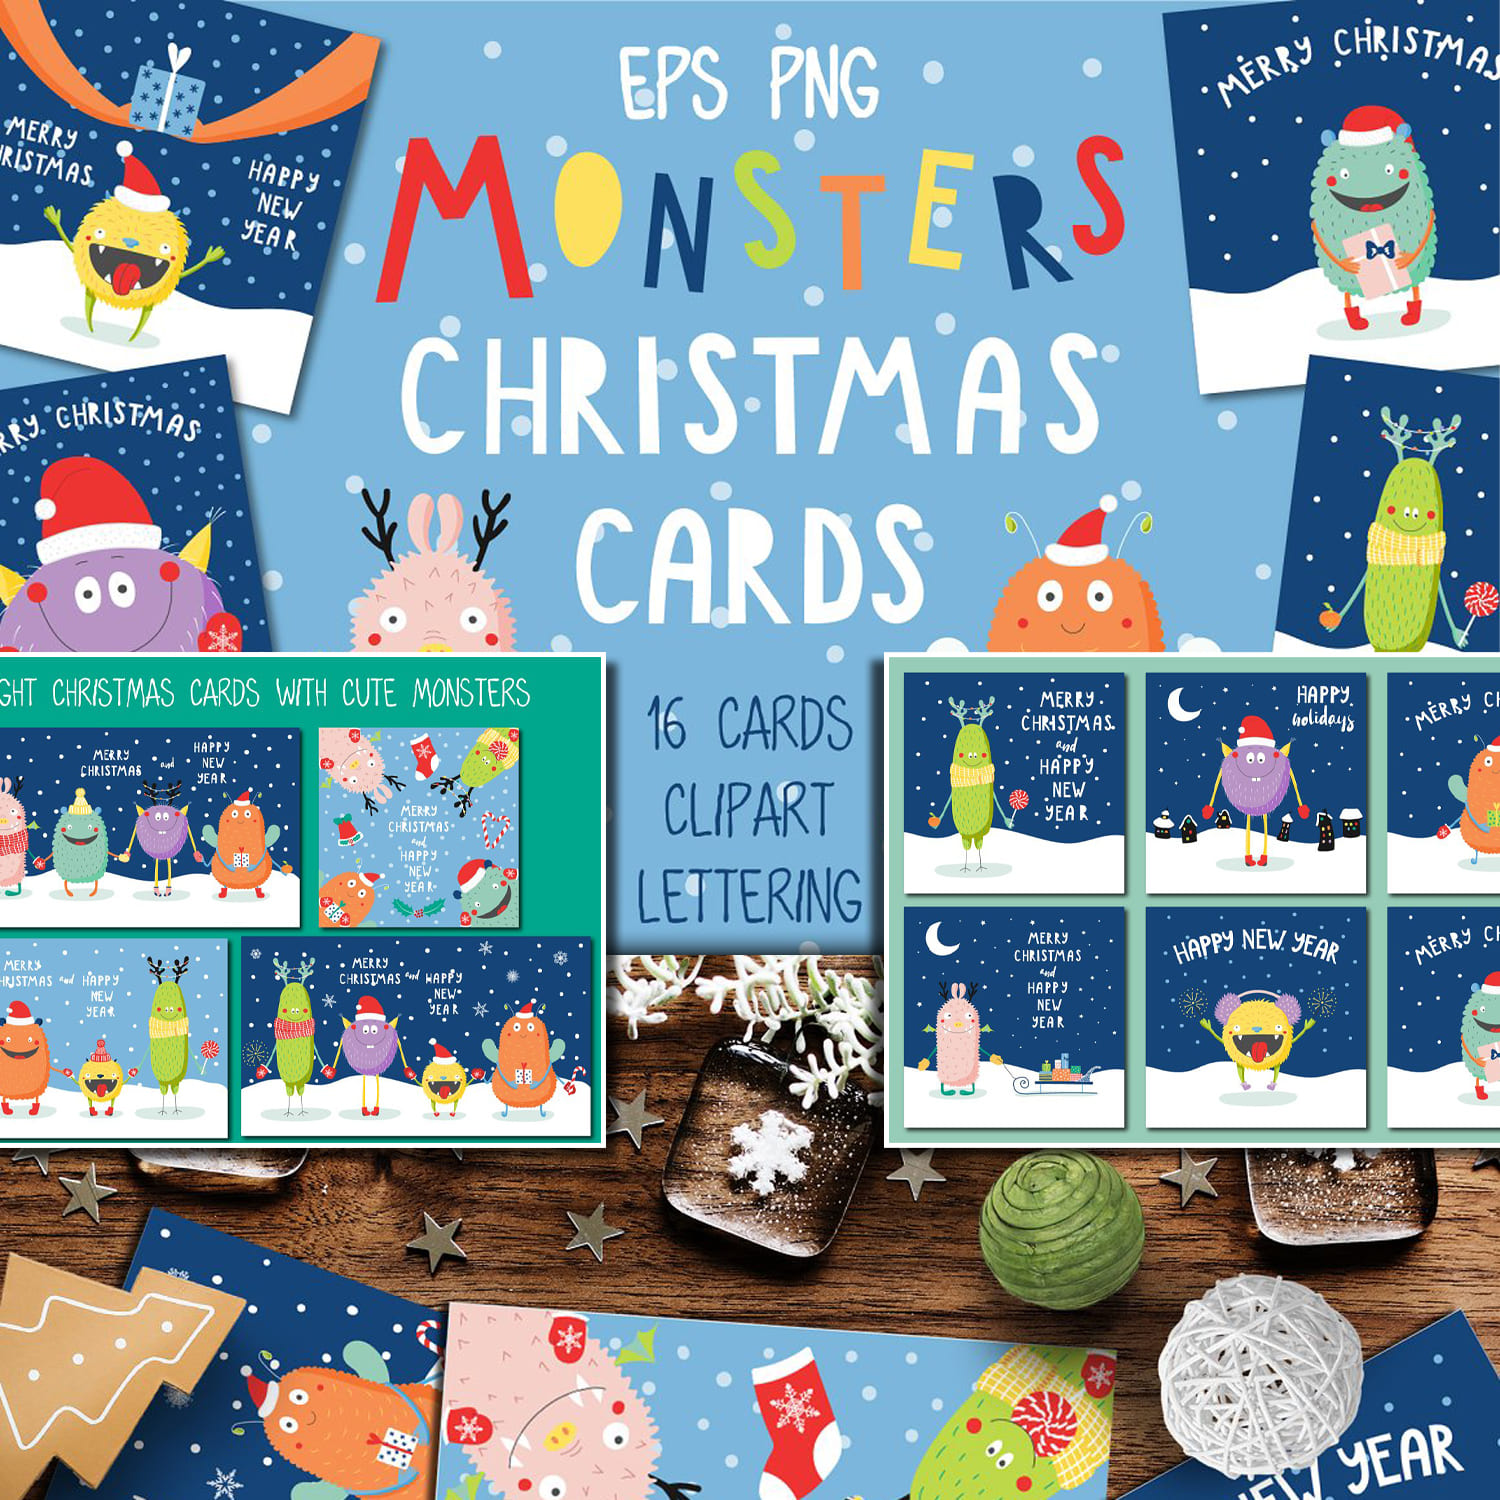 Cute Monsters Christmas Cards.